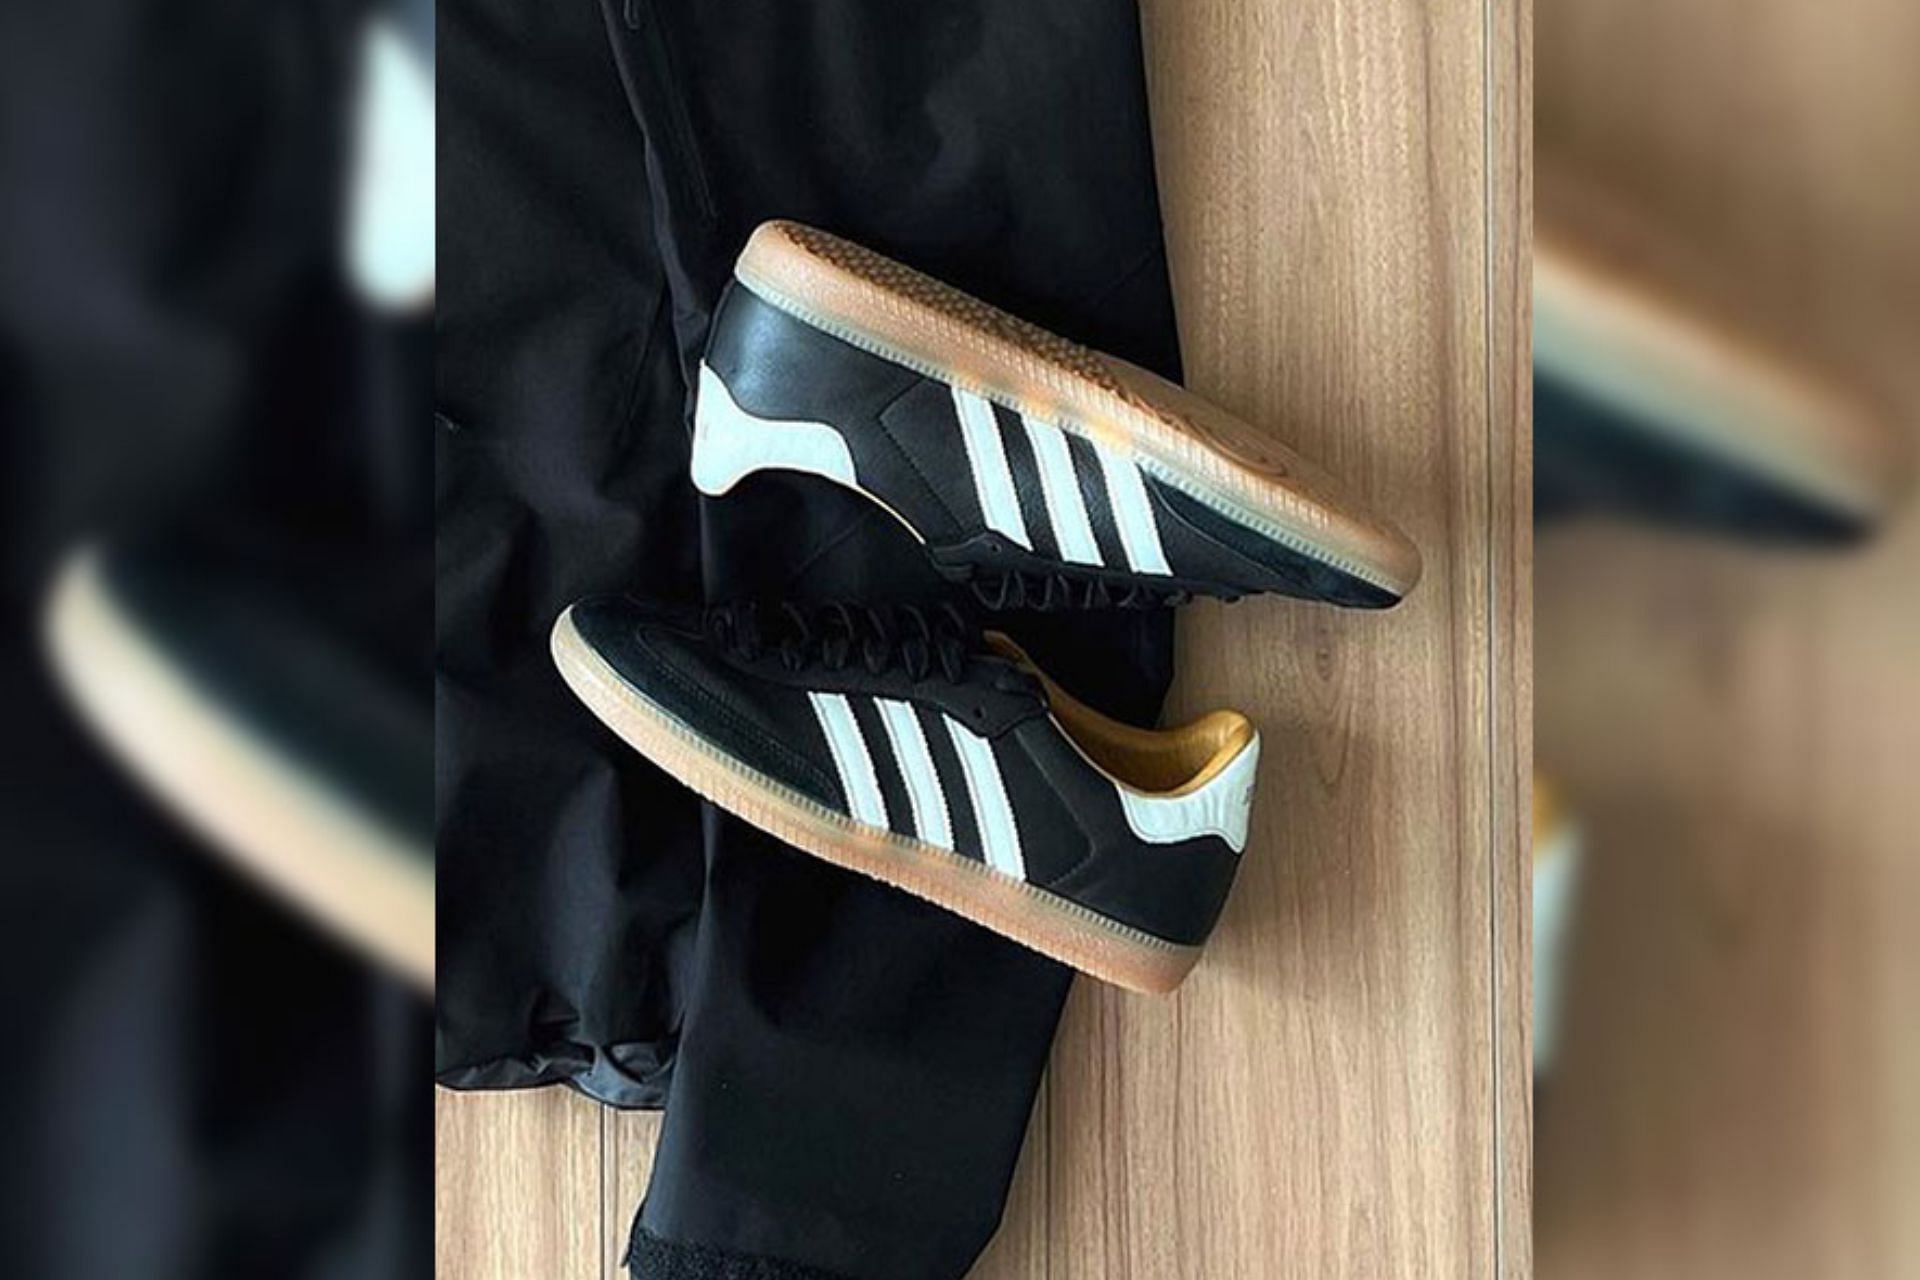 Another look at the black/white colorway (Image via Instagram/@Thrift2.000)